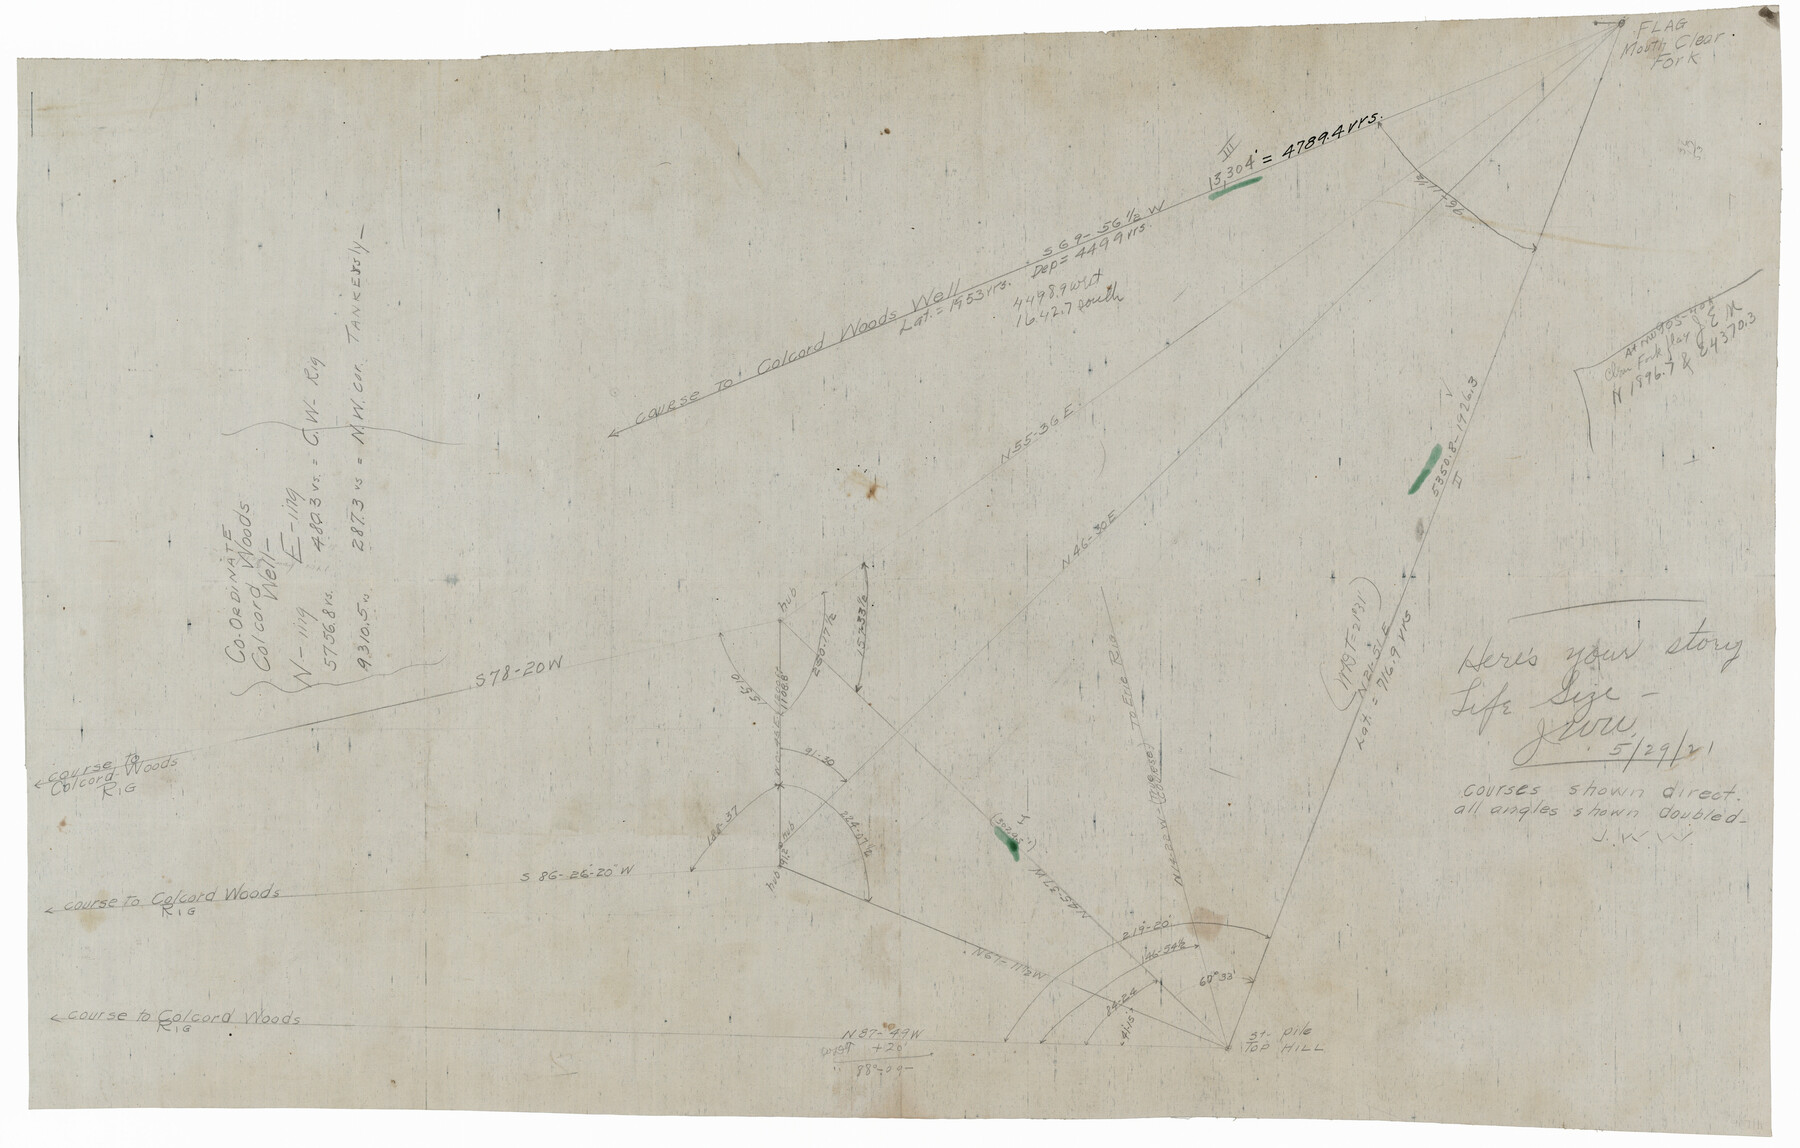 92088, [Pencil sketch showing triangulation from Flag on Mouth of Clear Fork and Top Hill], Twichell Survey Records